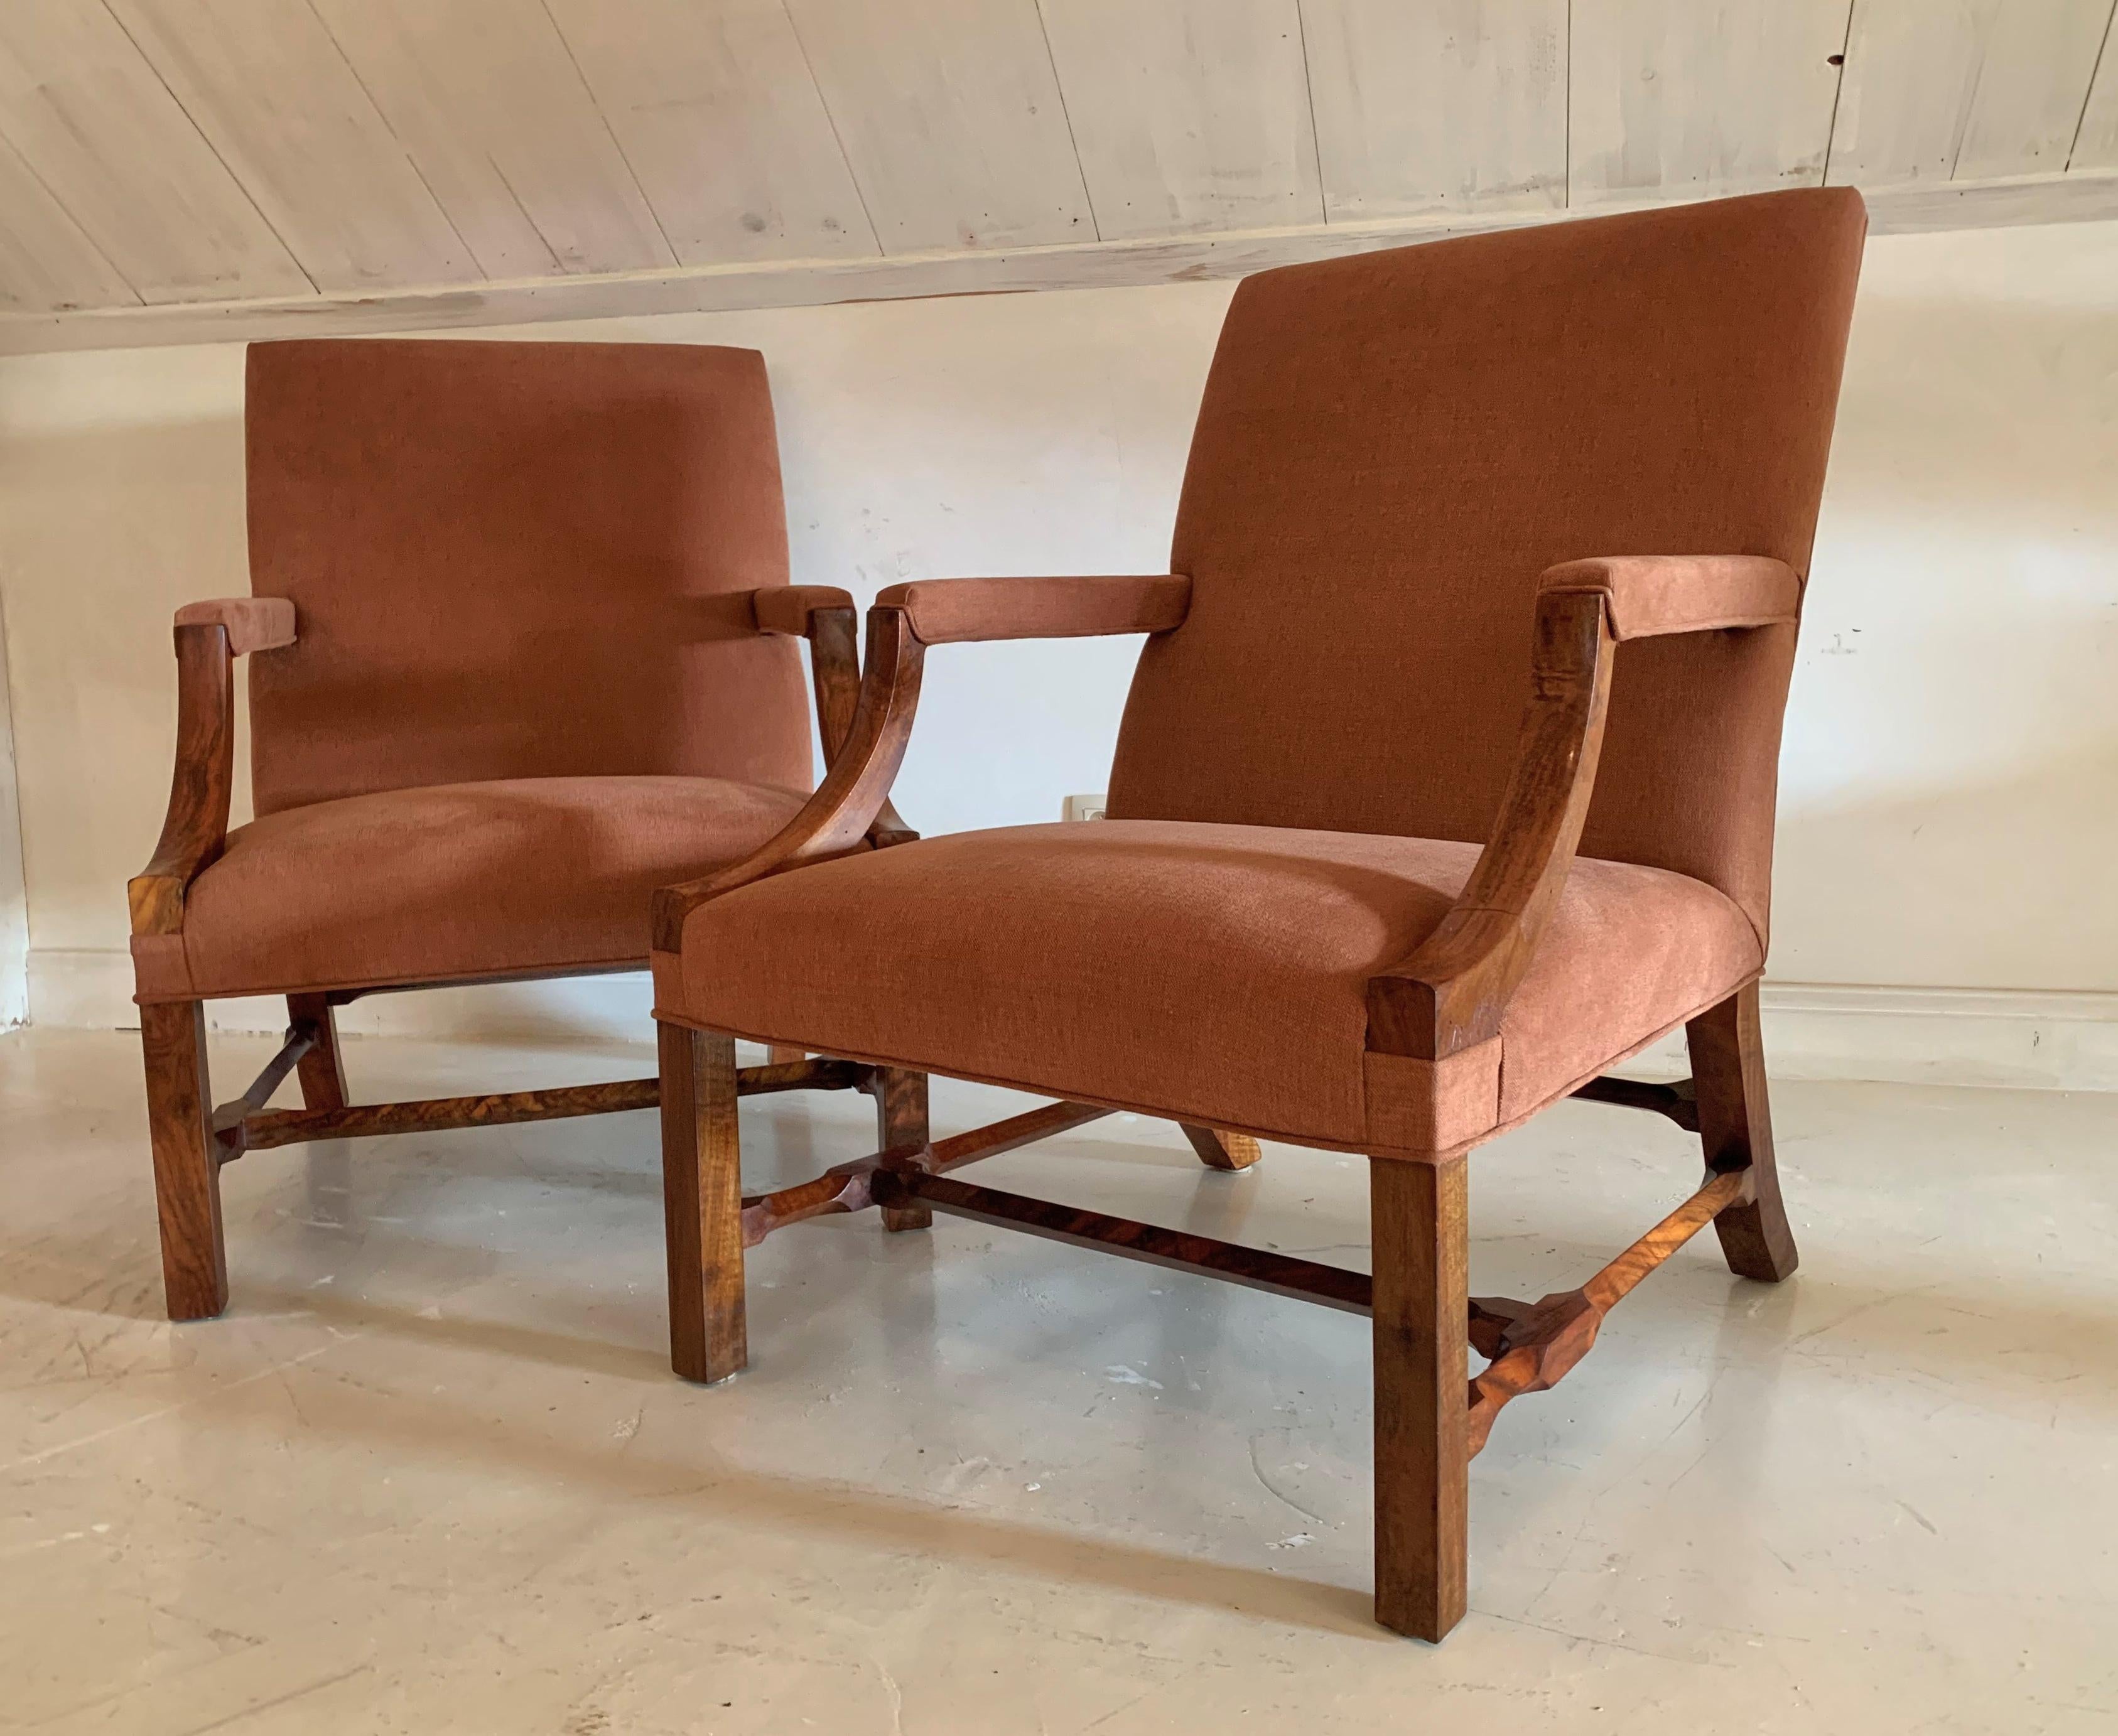 As we found a small but amazing batch of root walnut we decided to make a pair of chairs suitable for this rare woodspecies. Our choice of style was a classic high quality Gainsborough style lounge chair model. We complemented this with hand cut